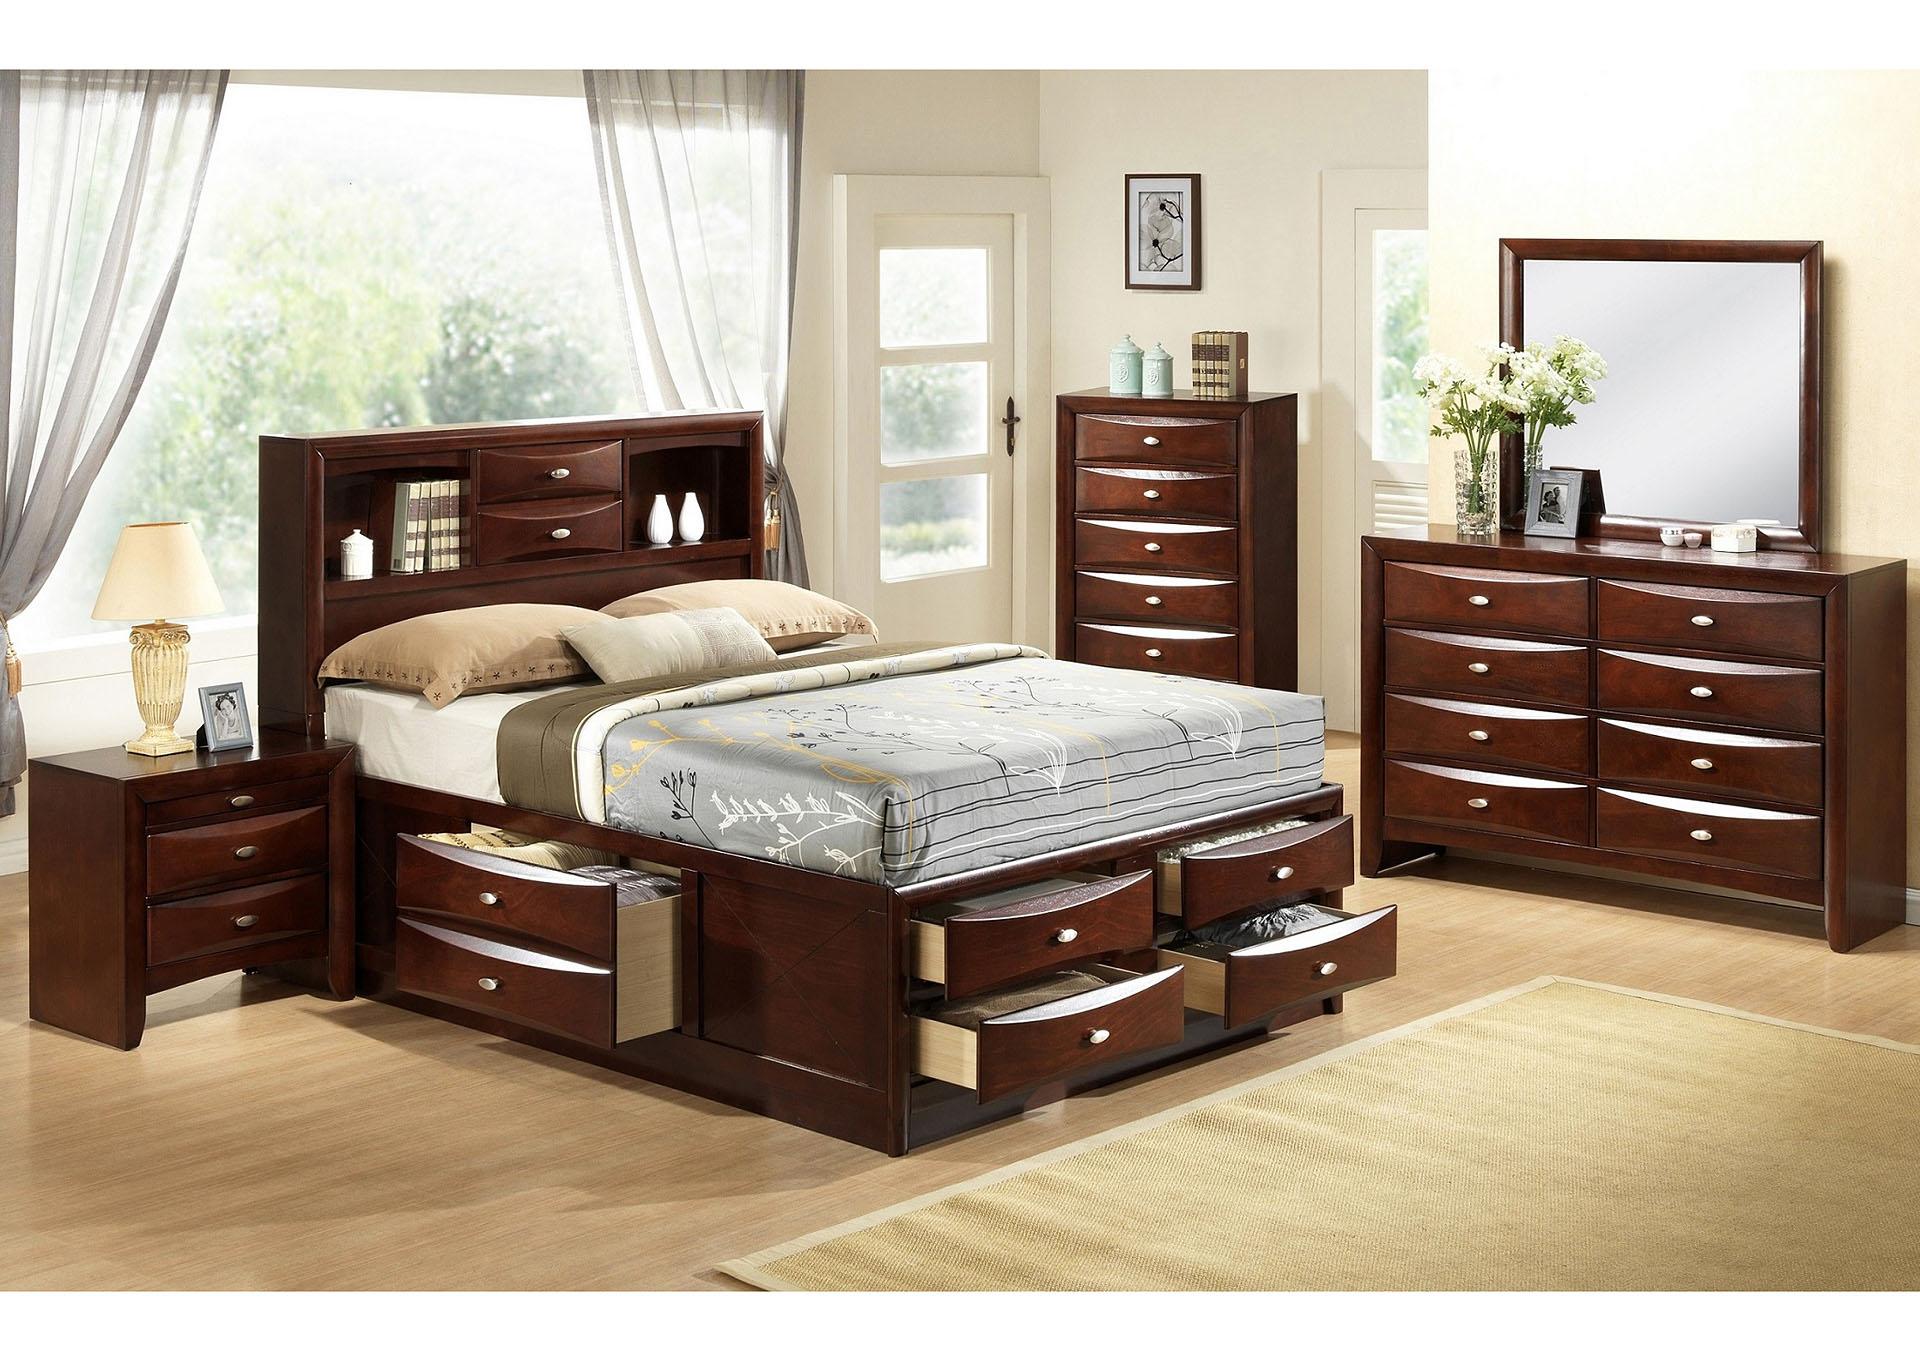 Contemporary, Modern Storage Bedroom Set EMILY GHF-808857948946 in Cherry 